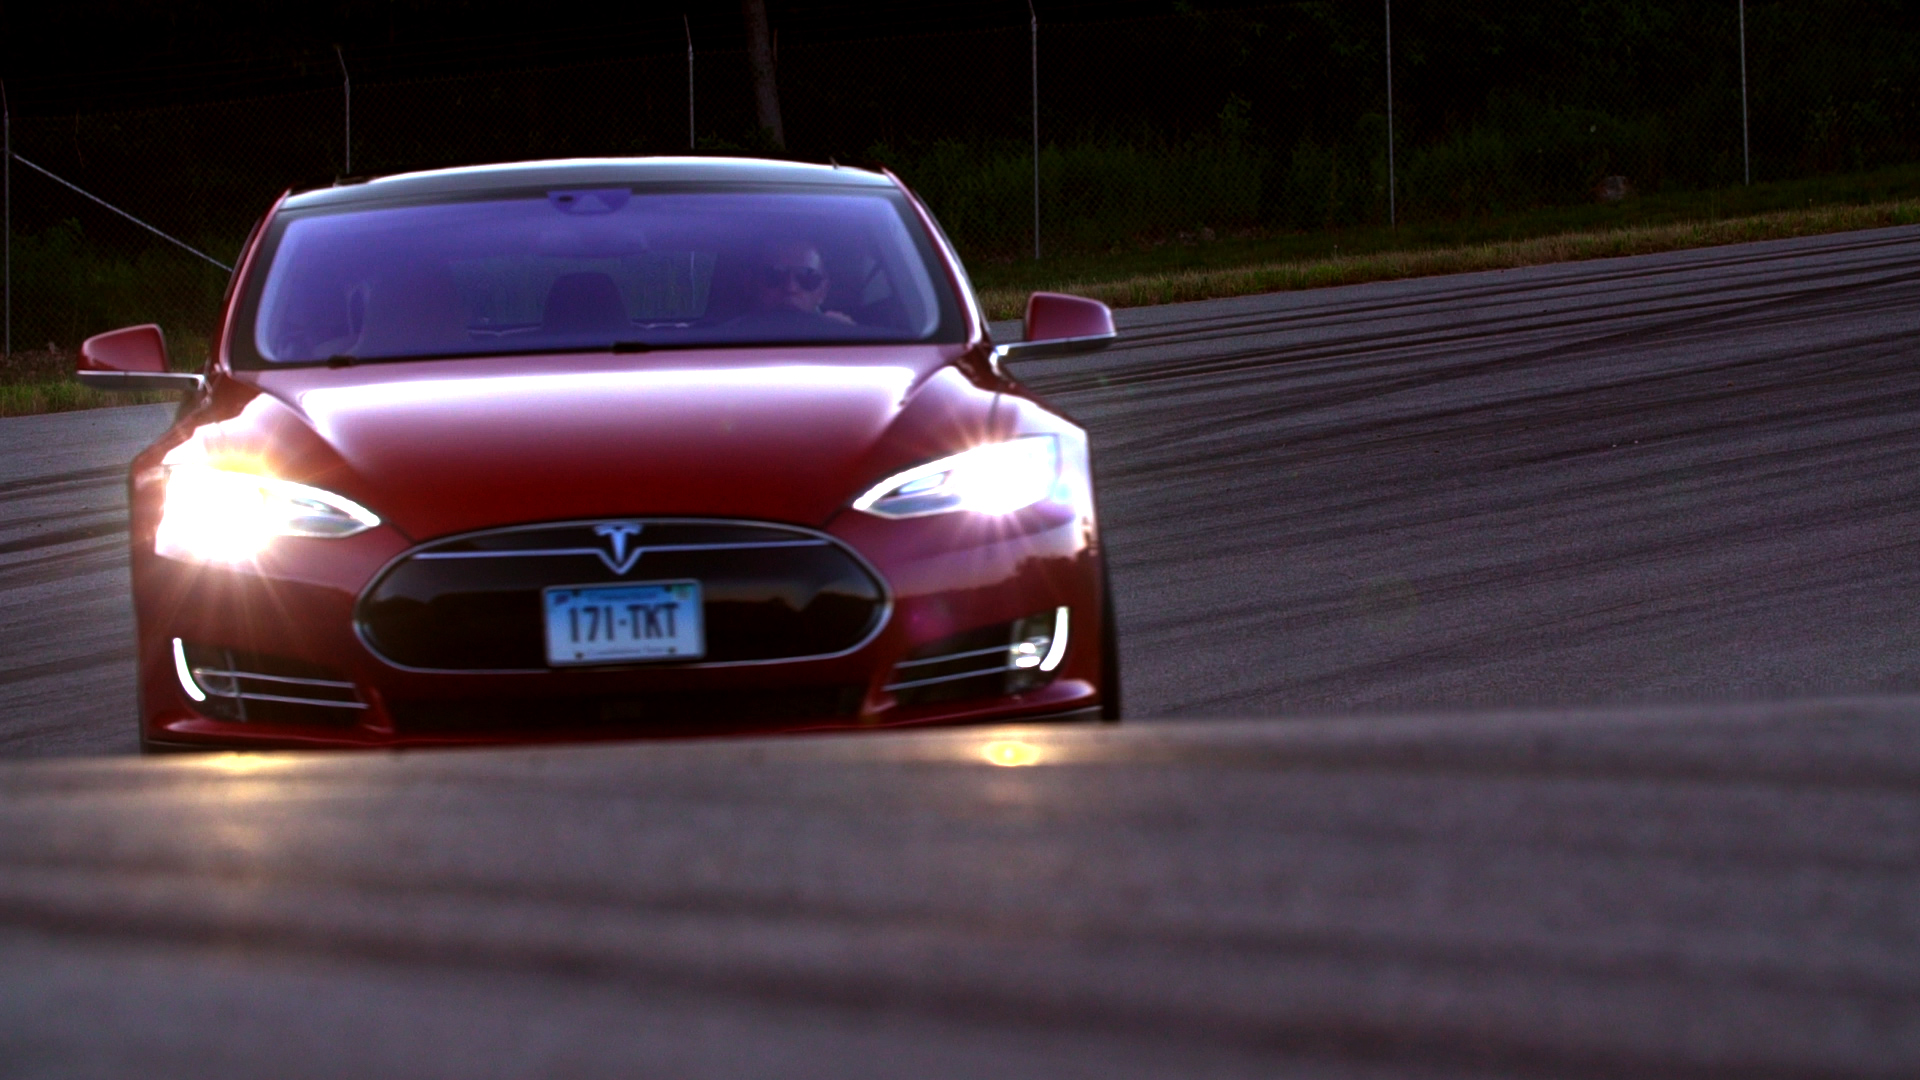 Tesla Denies Report Of Possible Safety Defect In Model S & “Troubling” Nondisclosure Agreements